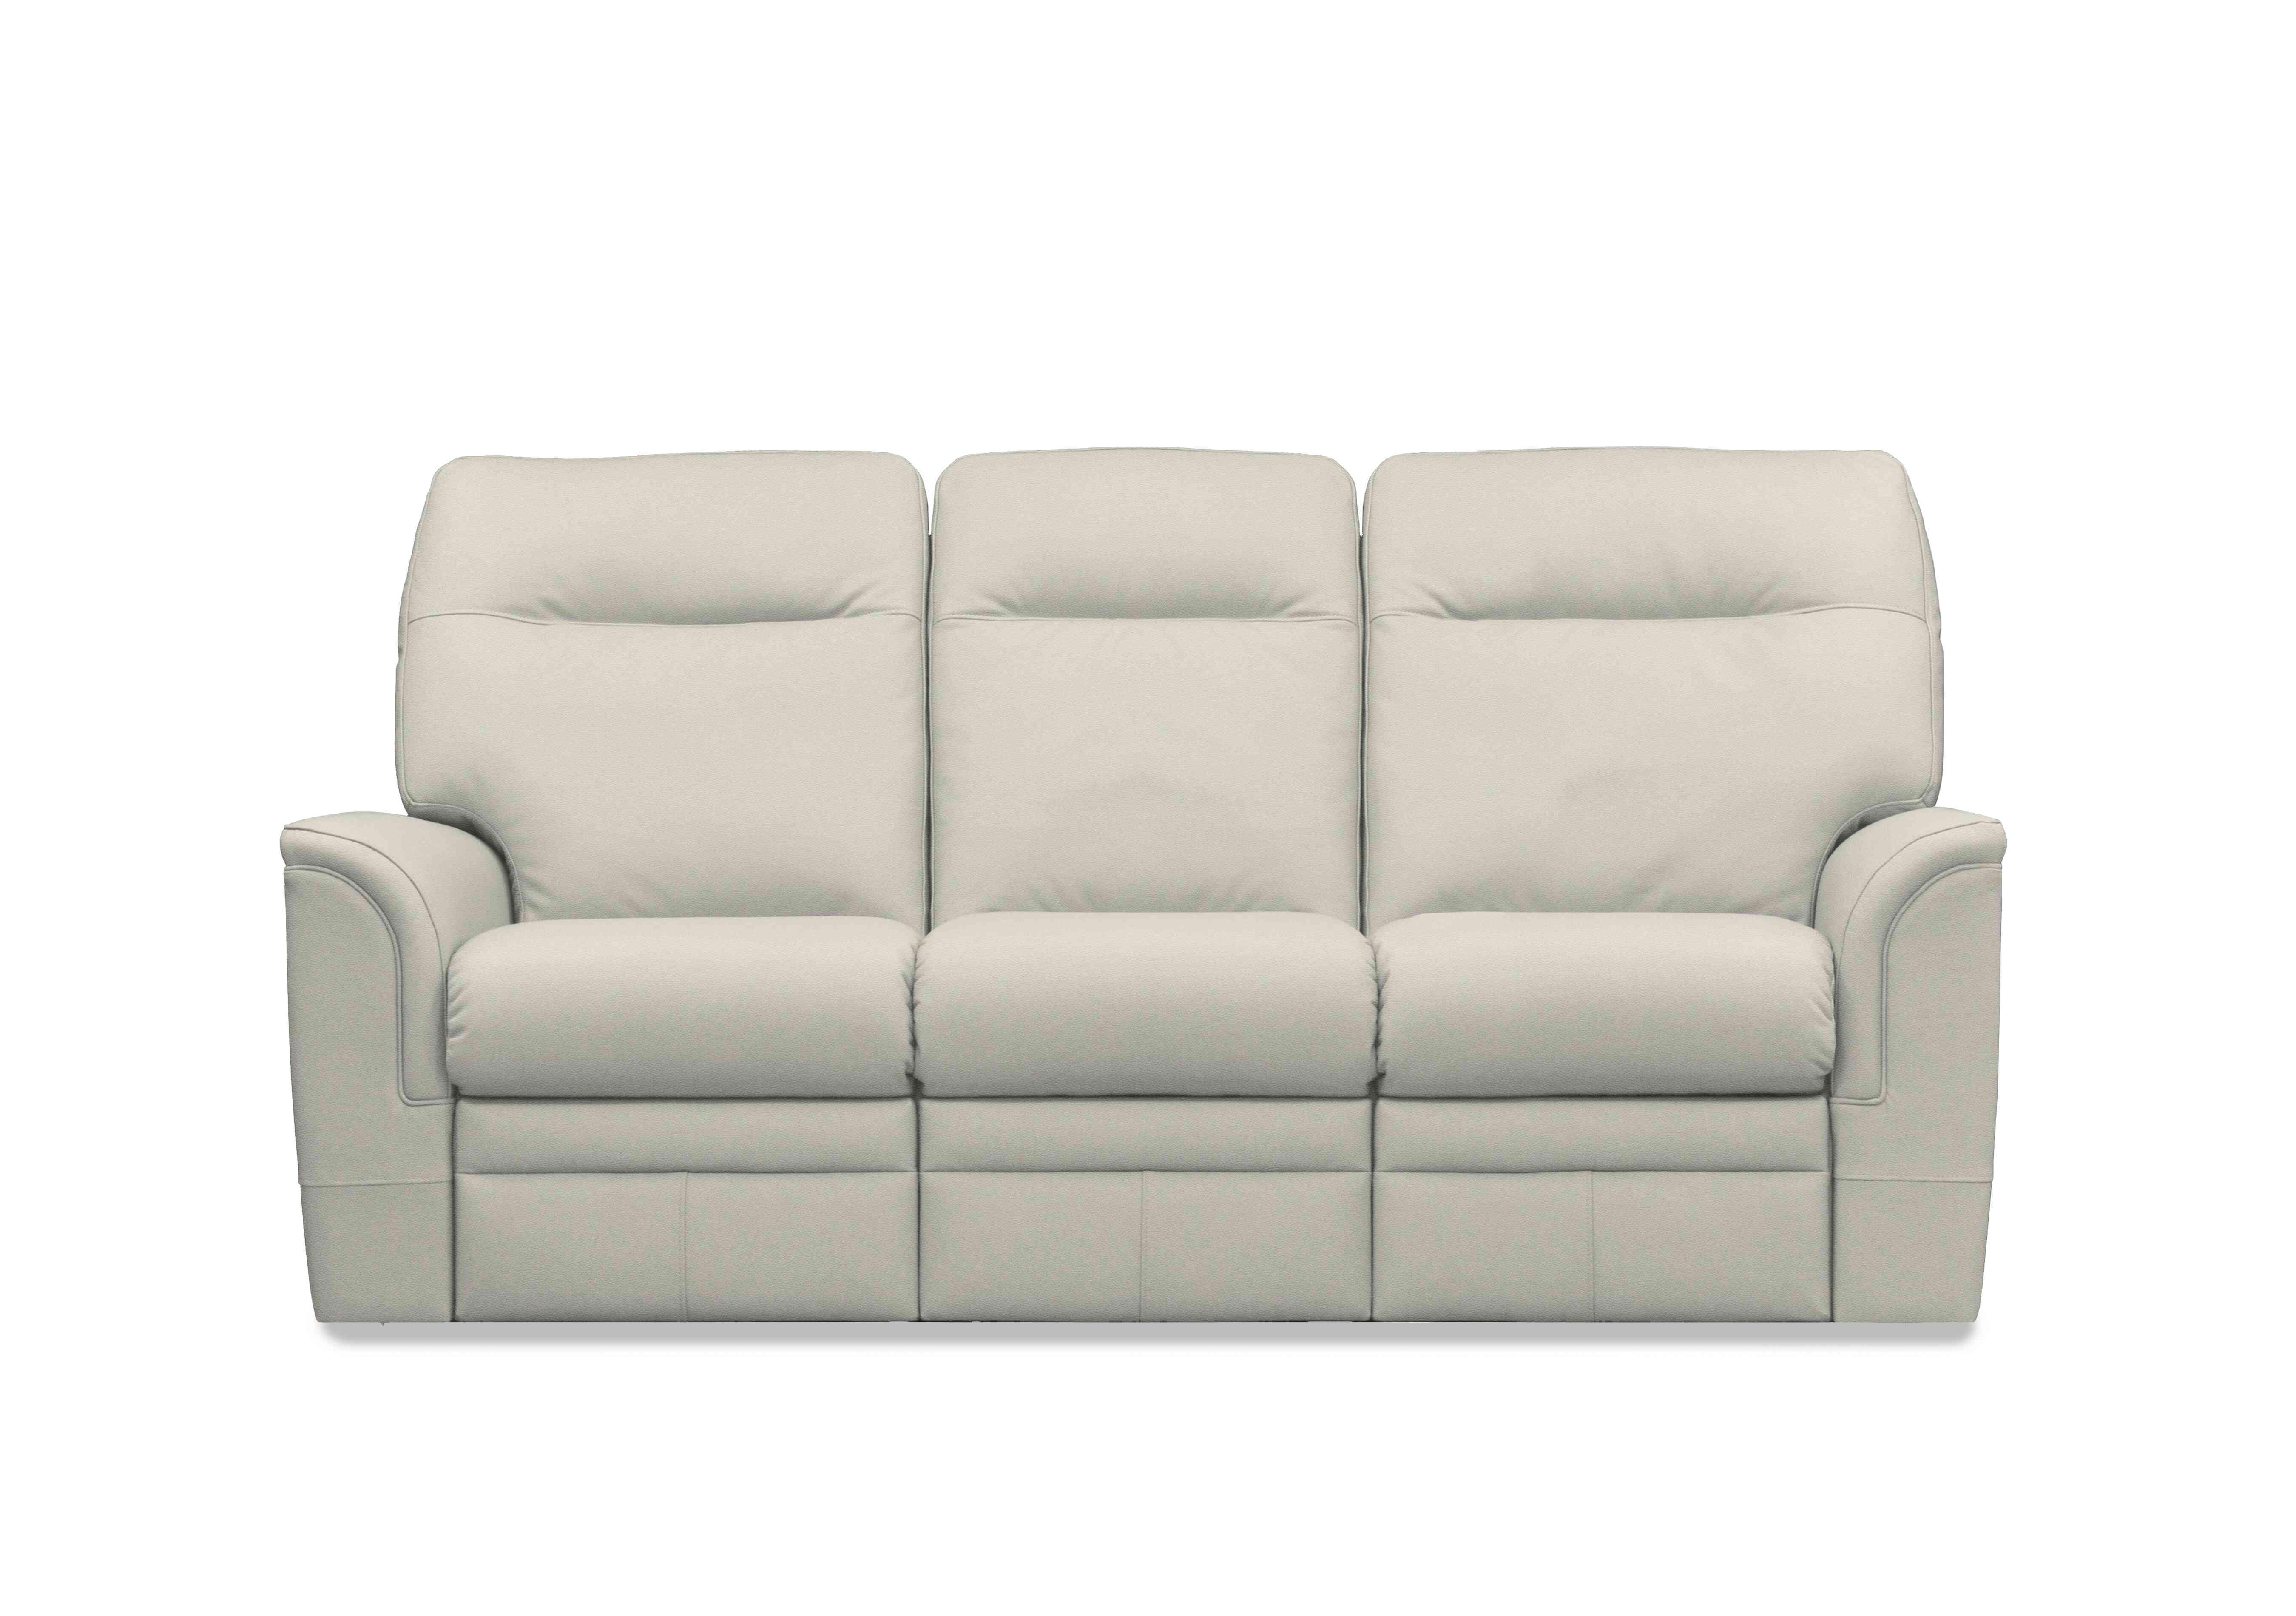 Hudson 23 Leather 3 Seater Power Recliner Sofa with Power Headrests and Power Lumbar in Como Dove 0053051-0092 on Furniture Village